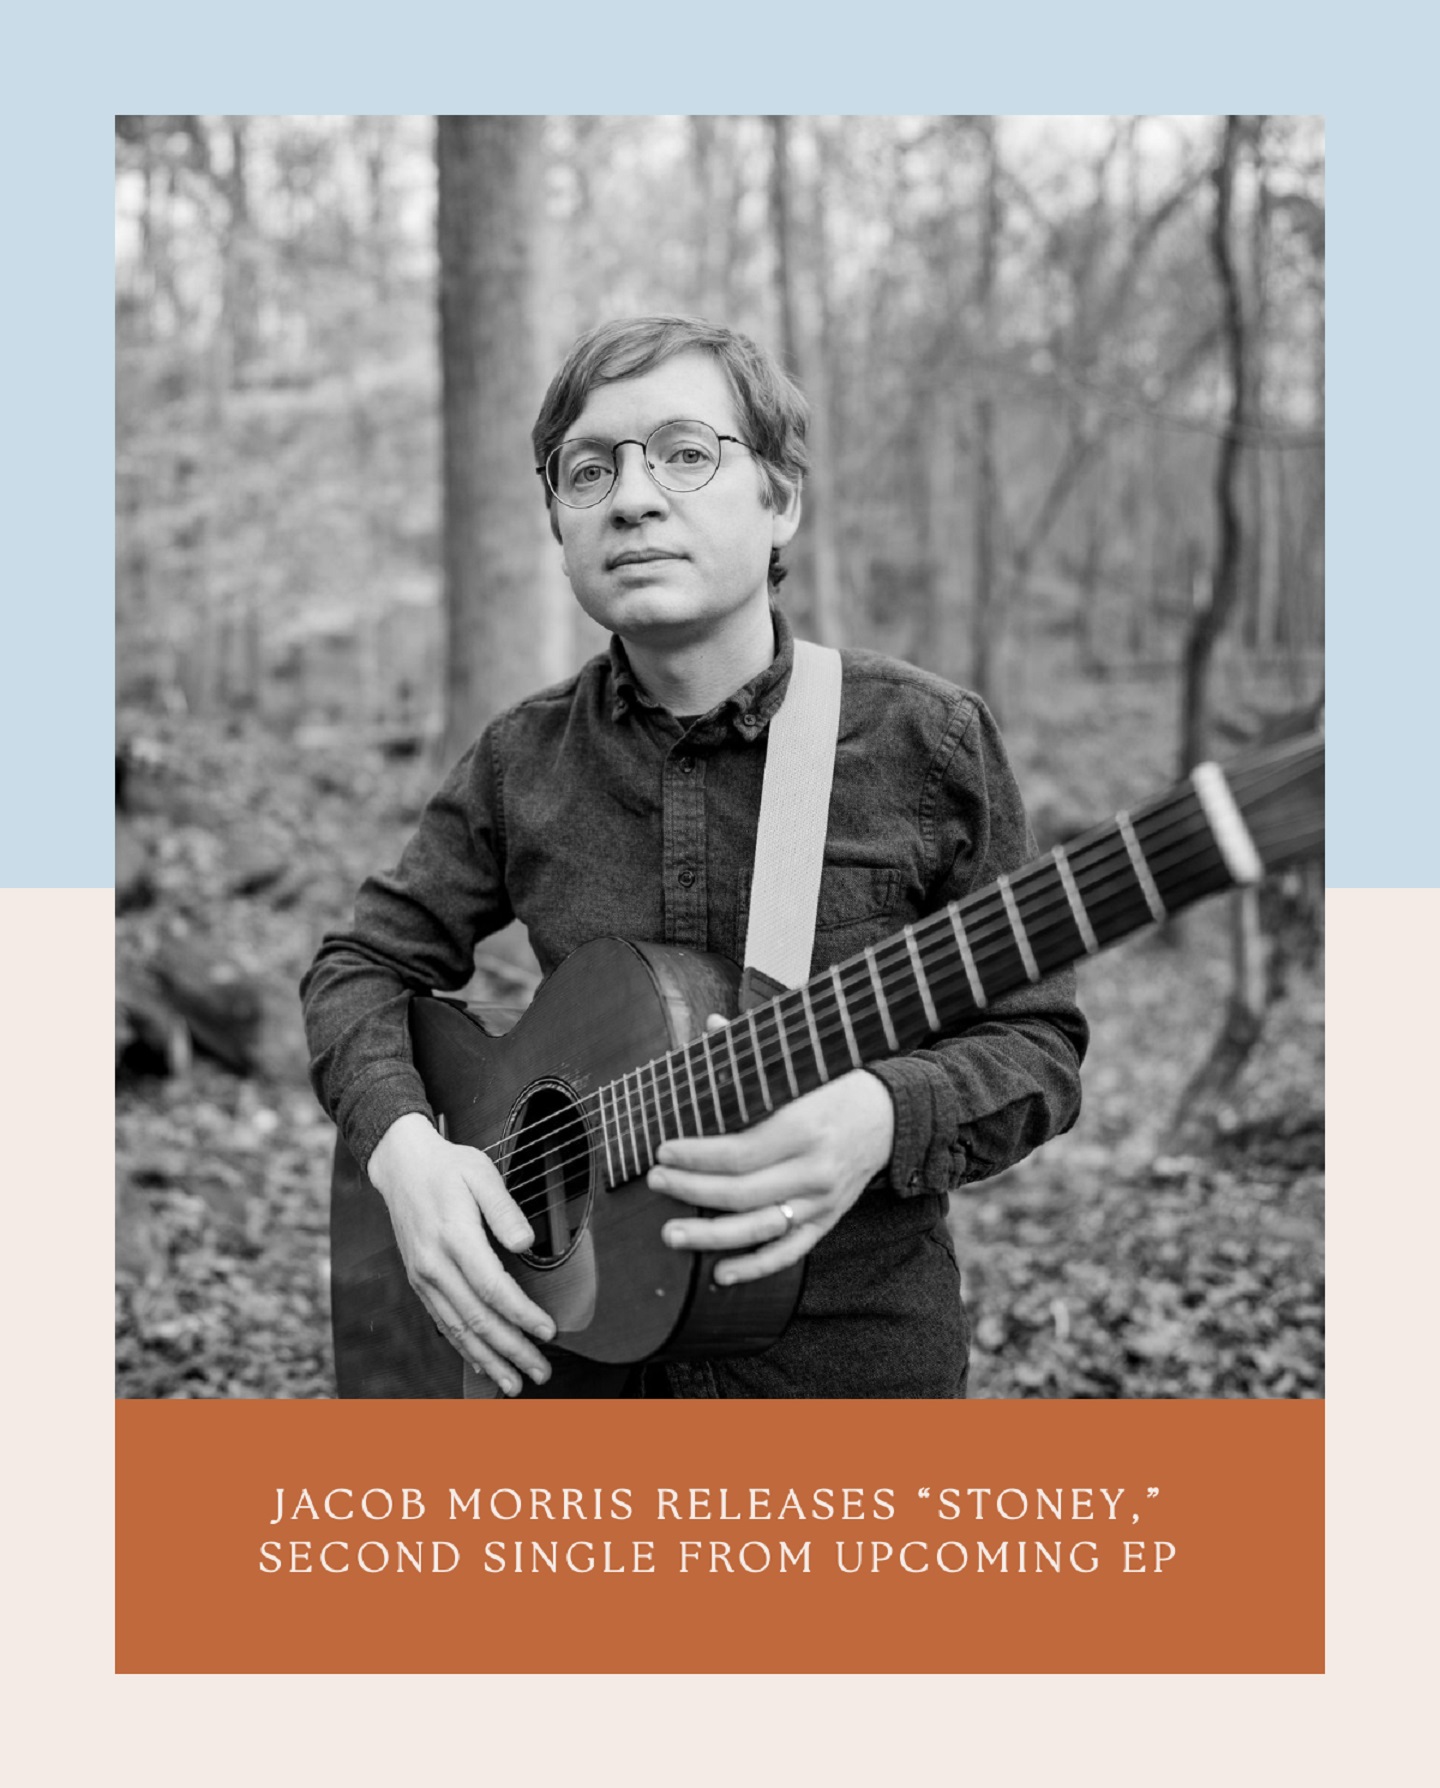 Jacob Morris releases “Stoney,” second single from upcoming EP